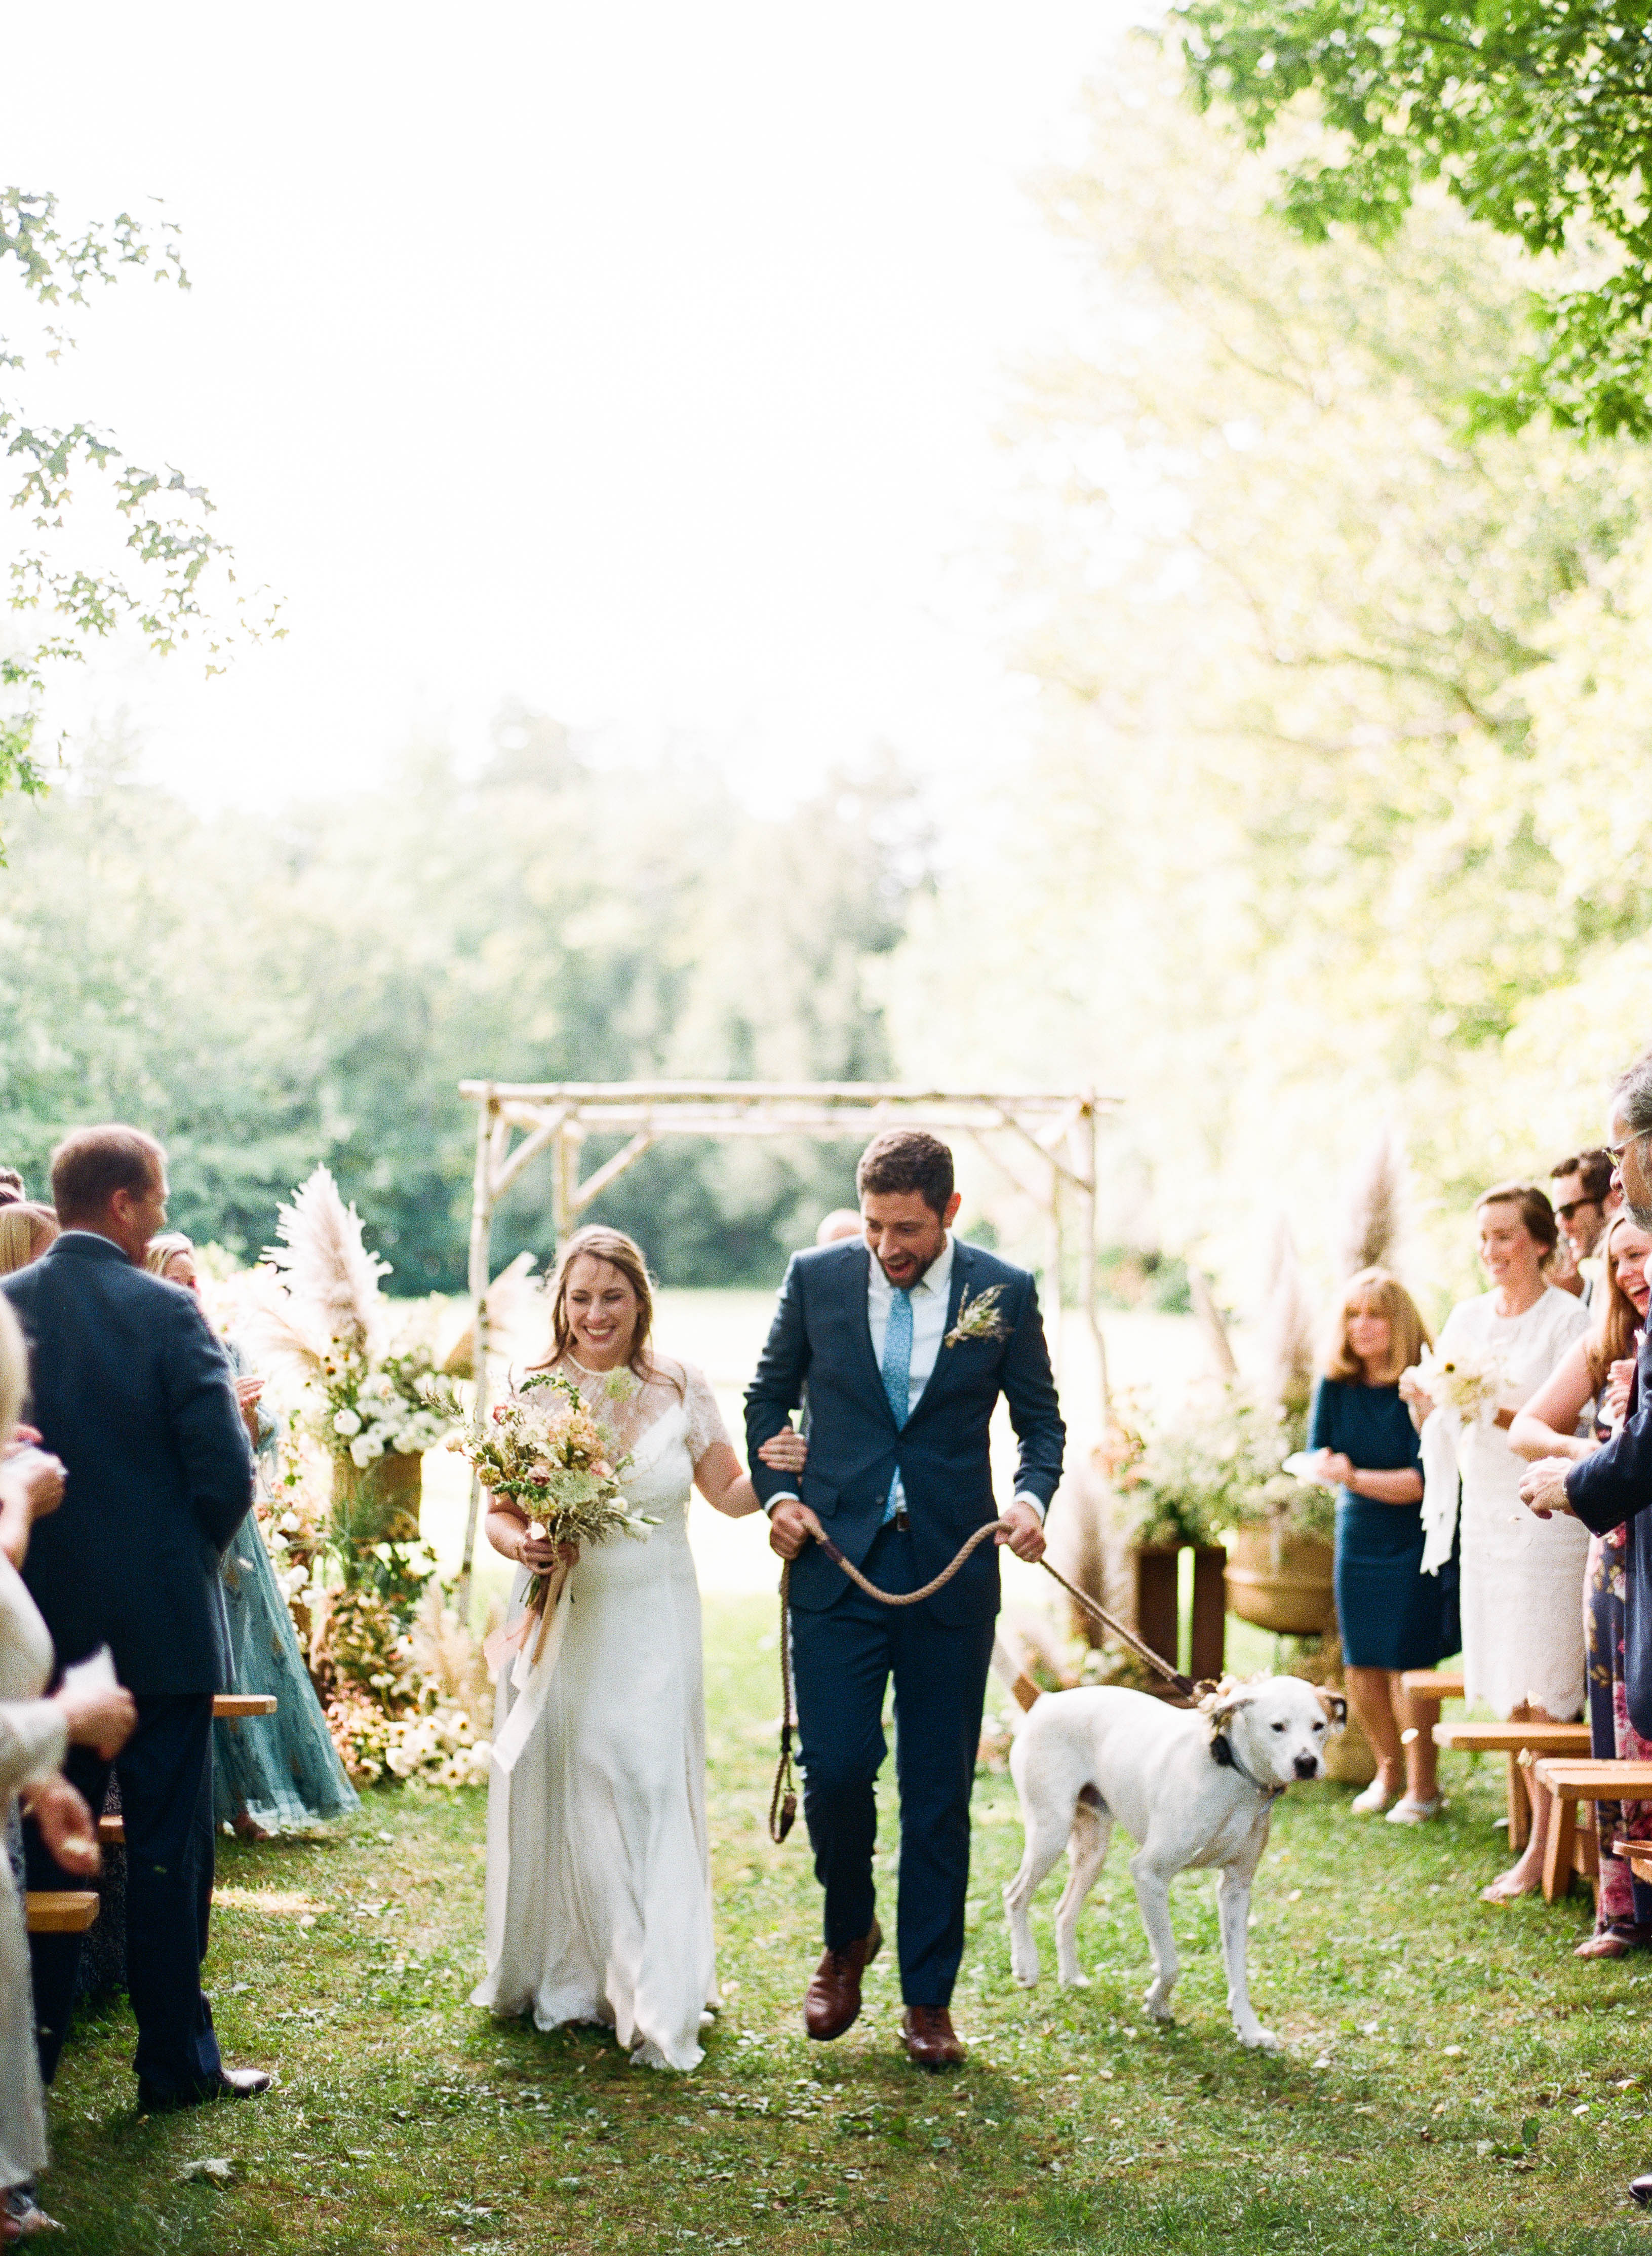 the bride and groom walking down the aisle with their dog at the end of their ceremony